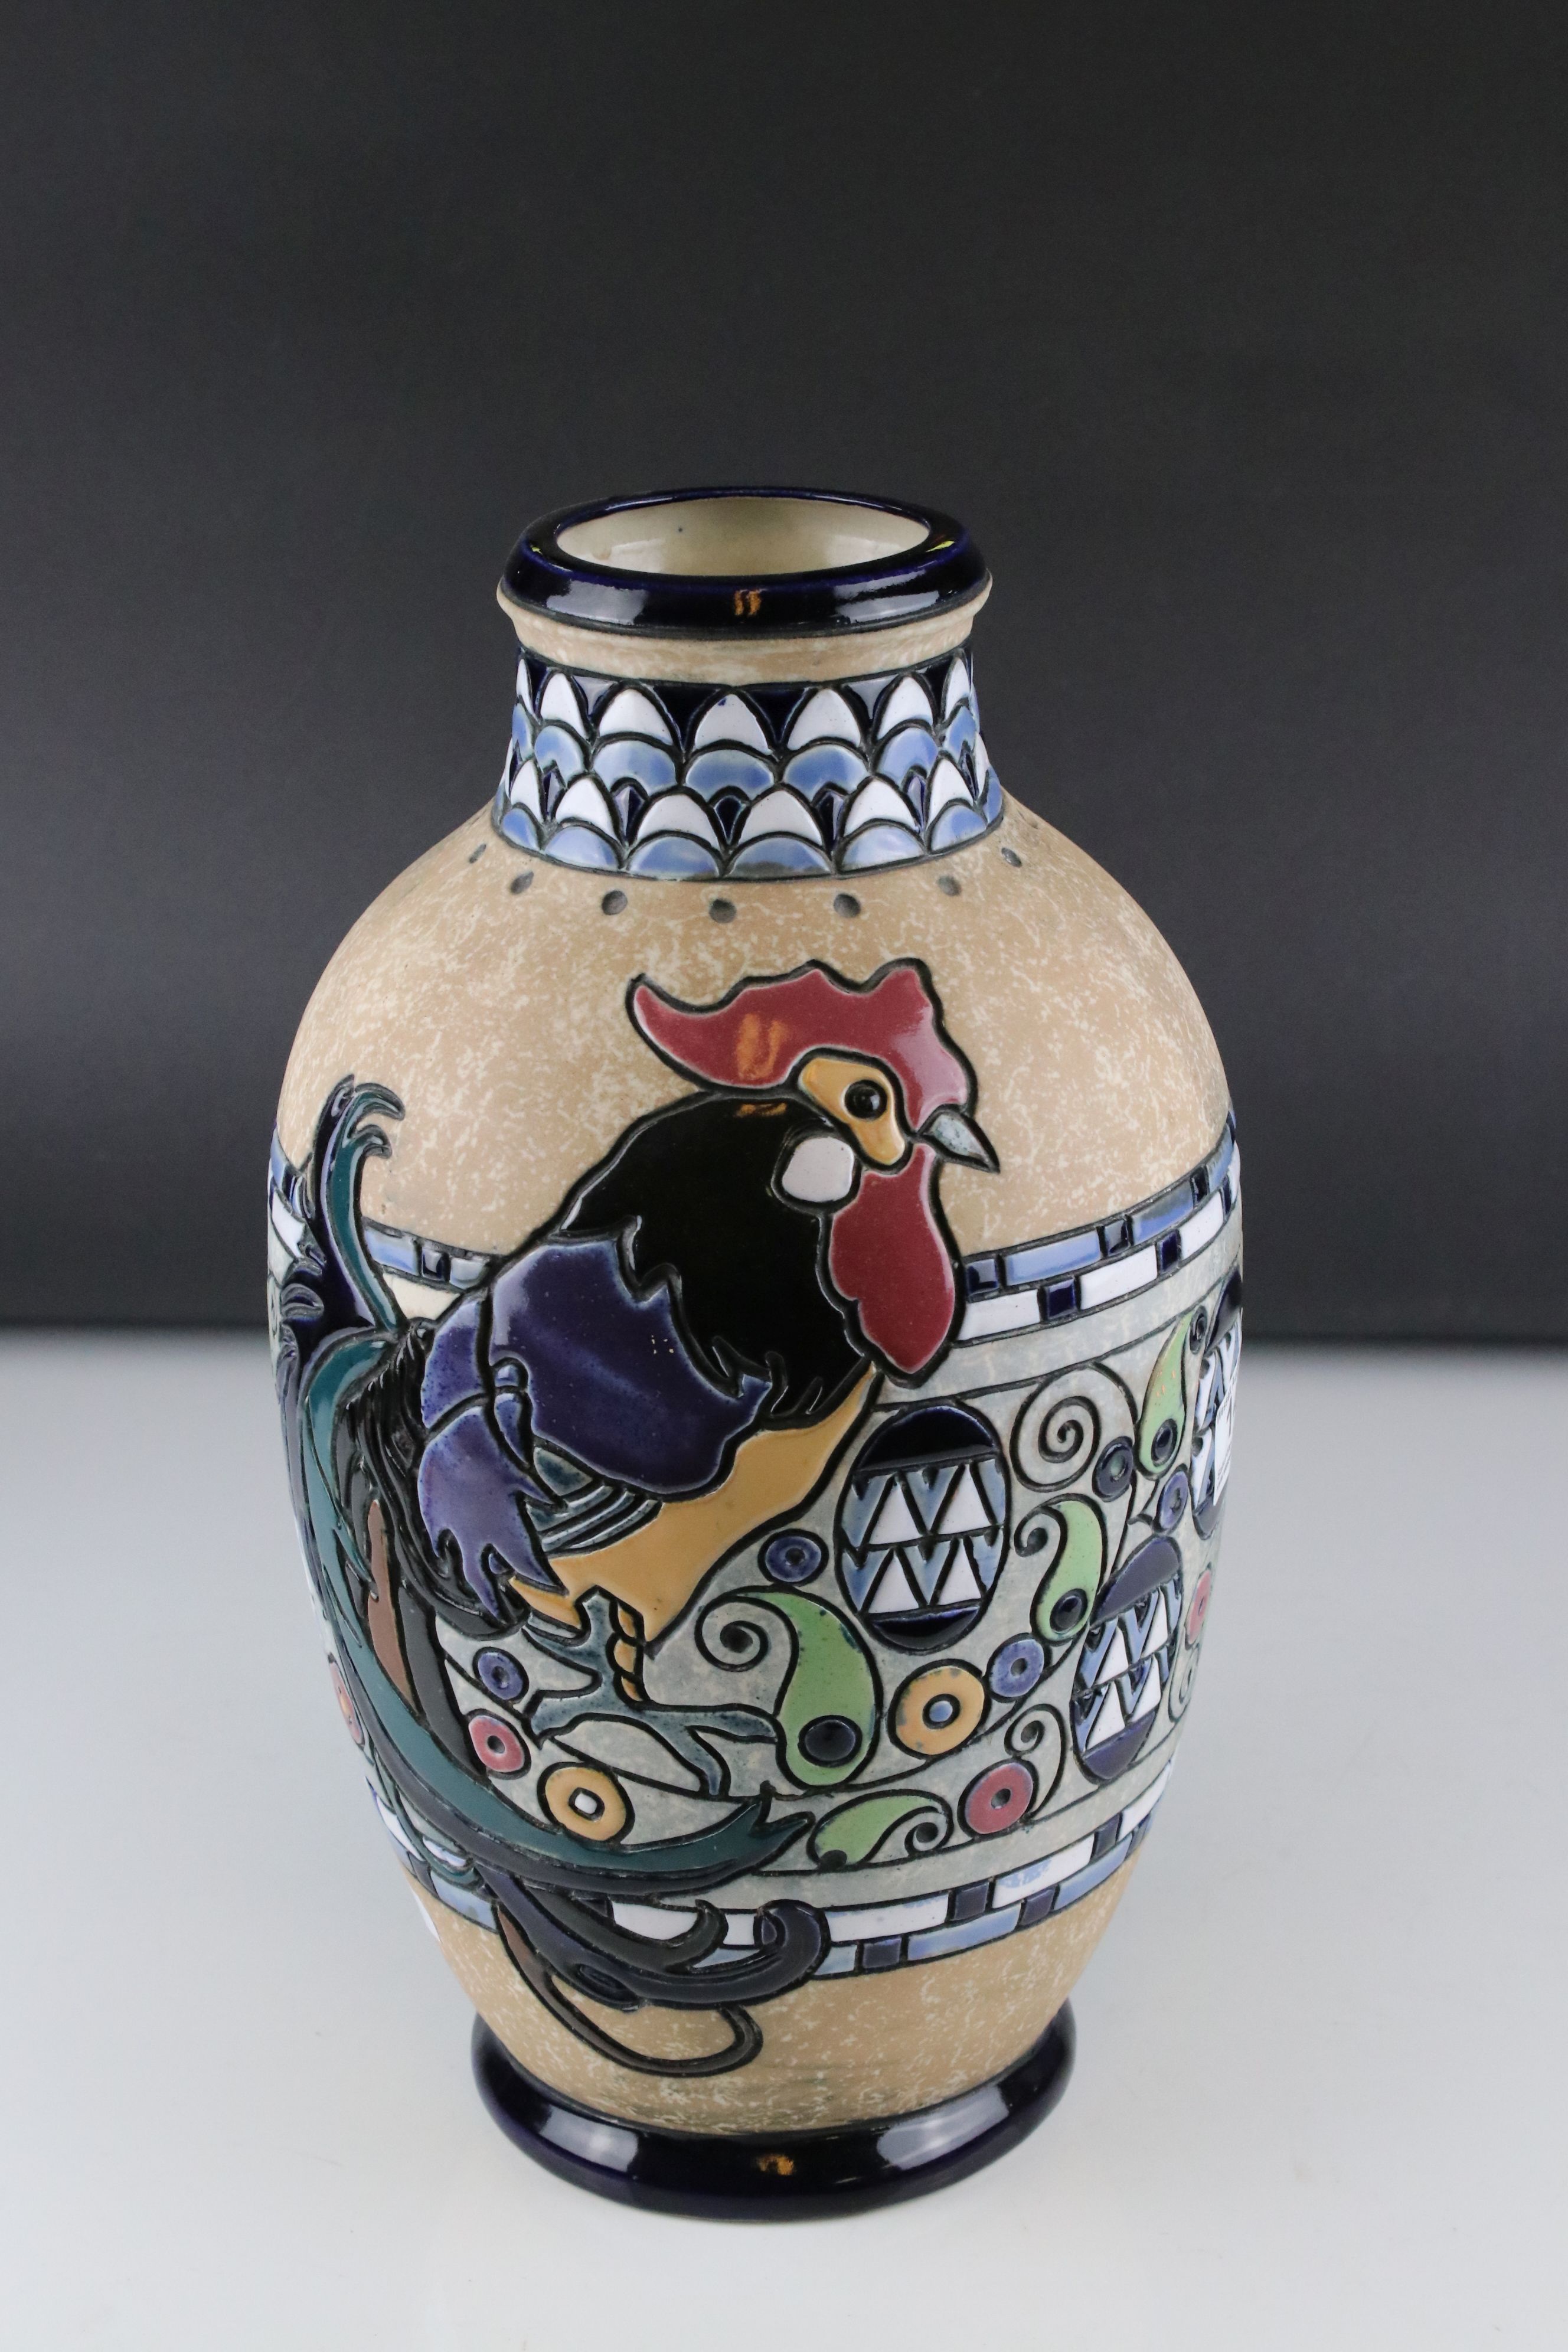 Amphora Pottery Vase with Cockerel / Rooster design, 36cms high